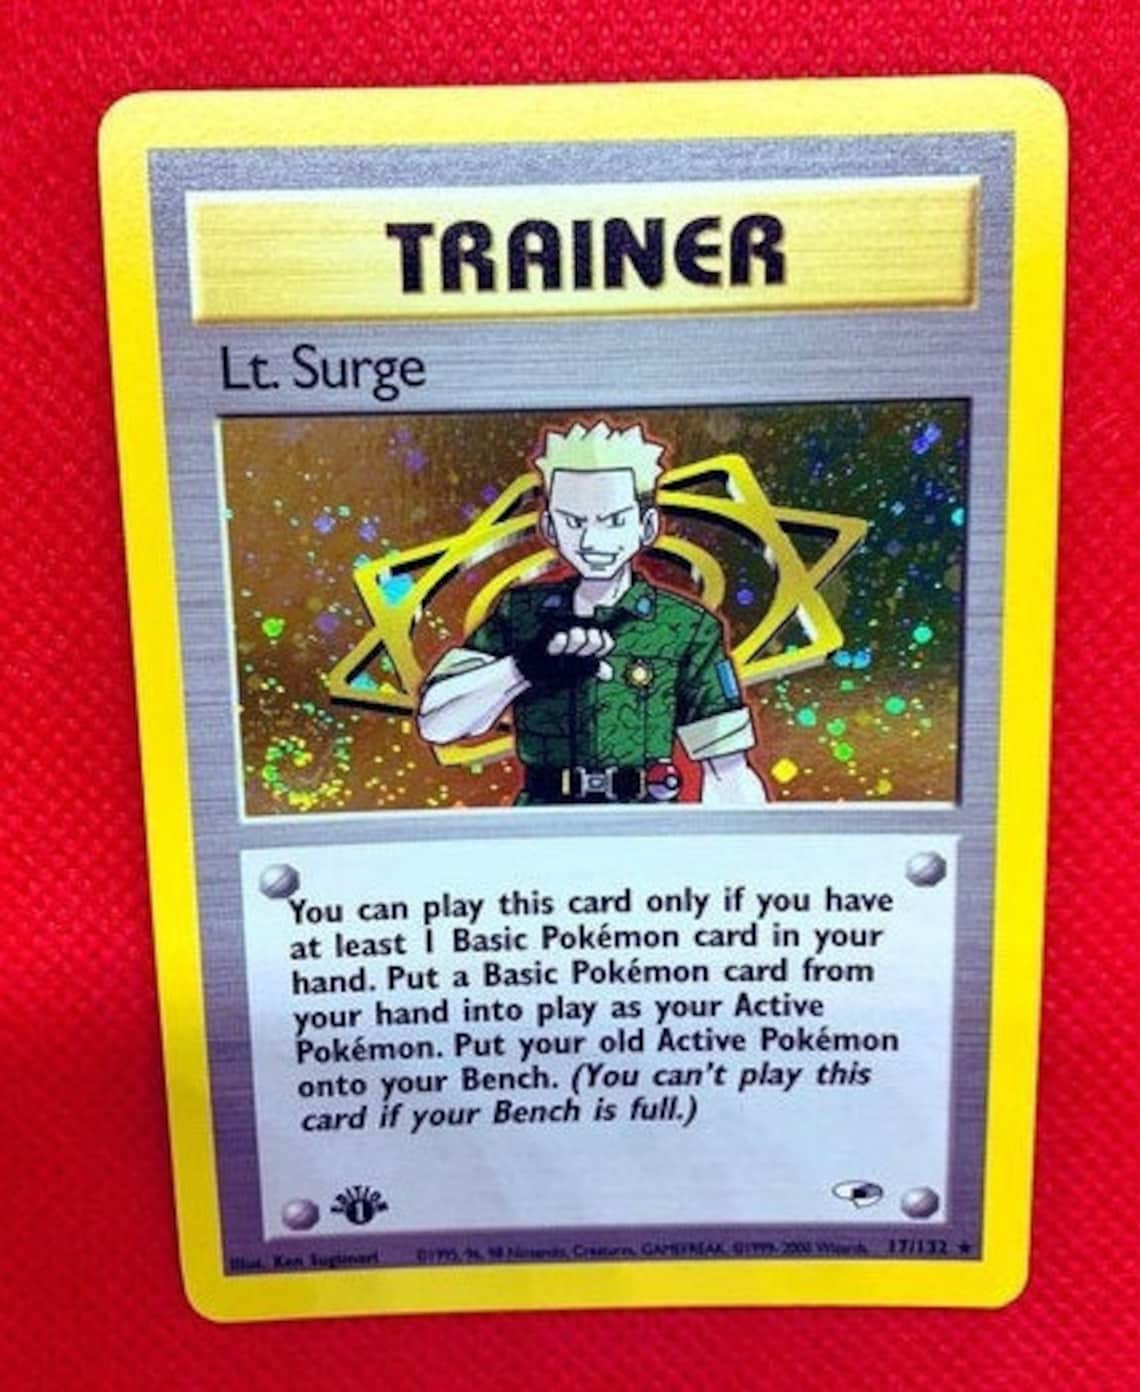 Lt. Surge Trainer 1st EDITION Holo Gym Heroes Pokemon Card | Etsy